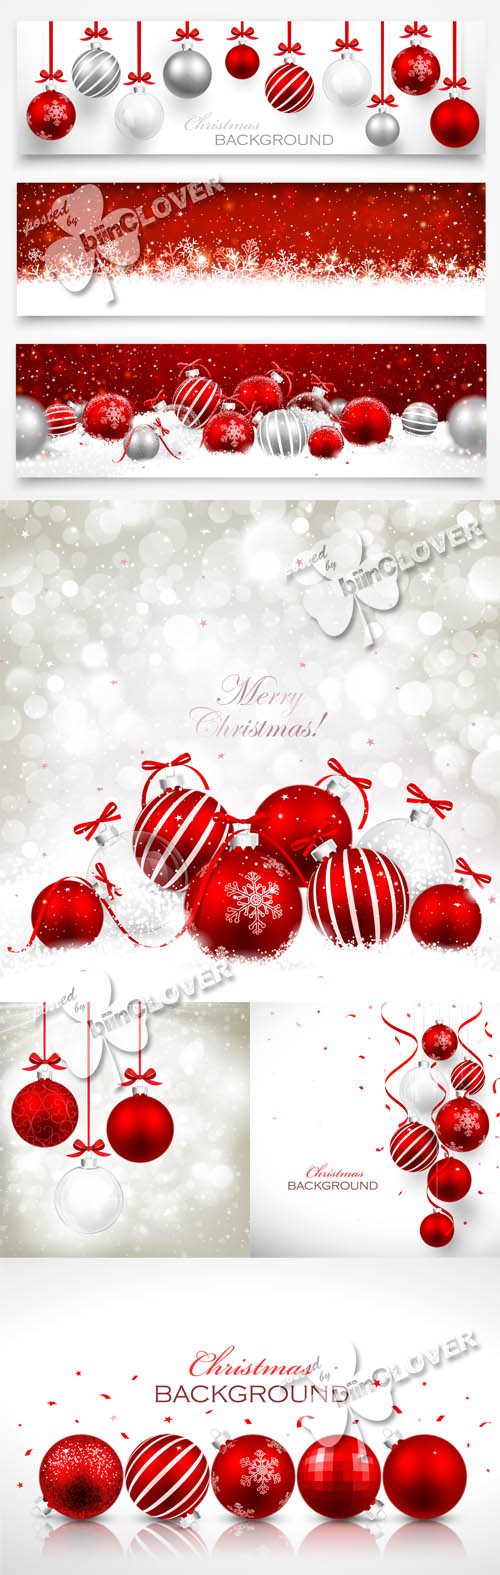 Christmas cards with red balls 0539